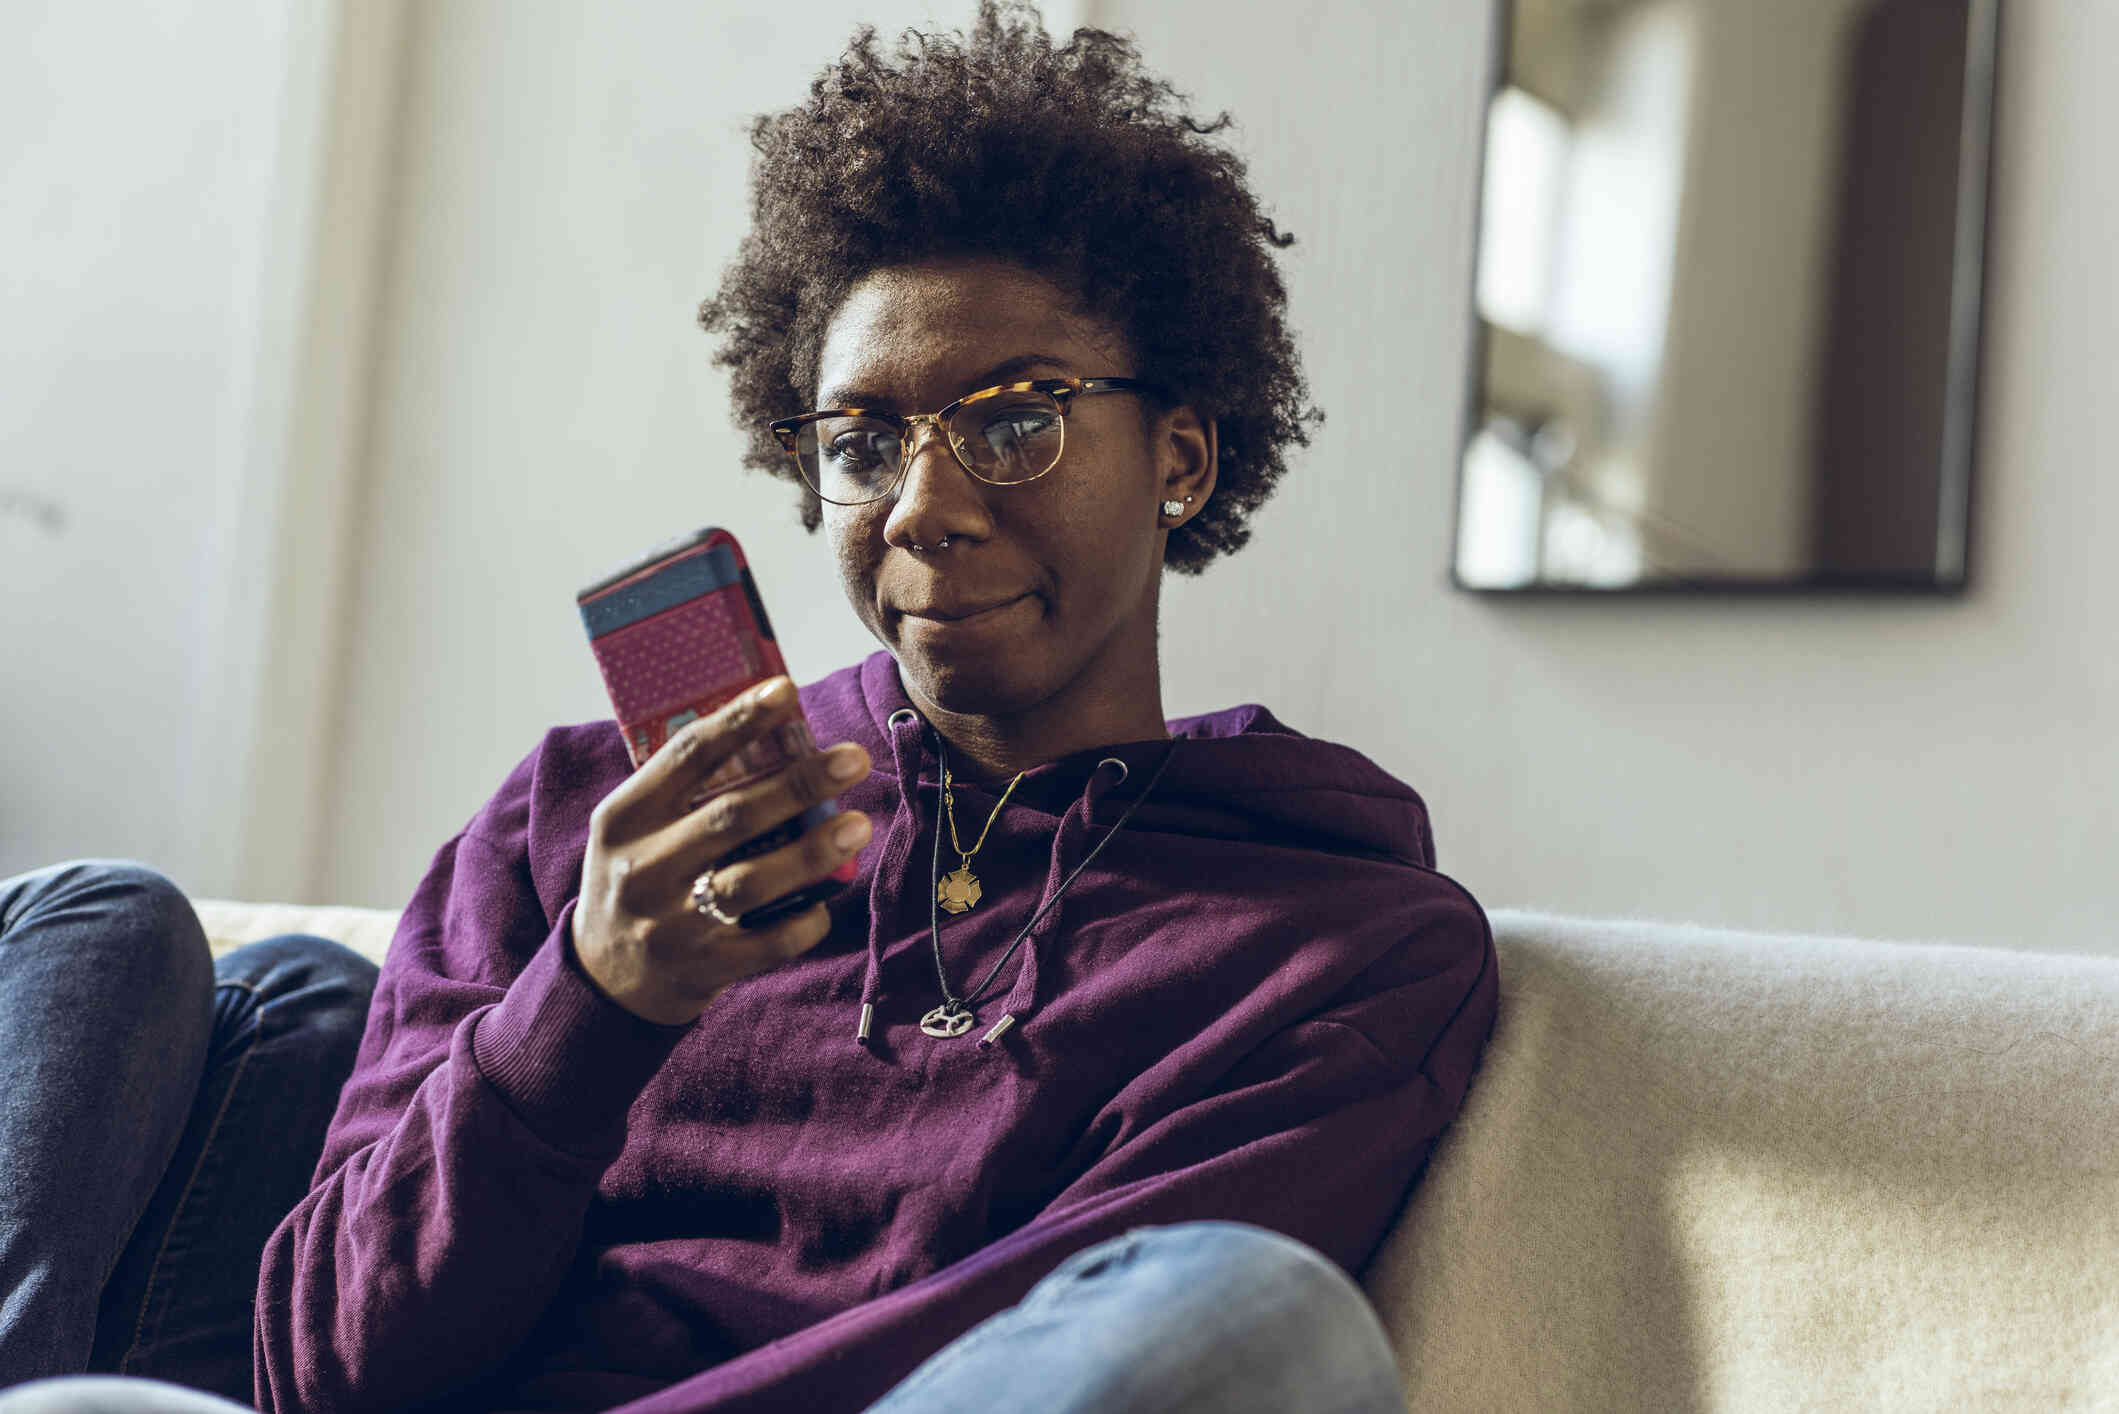 A woman in a purple sweater sits in the couch and looks down at the cellphone in her hand with a curious expression.